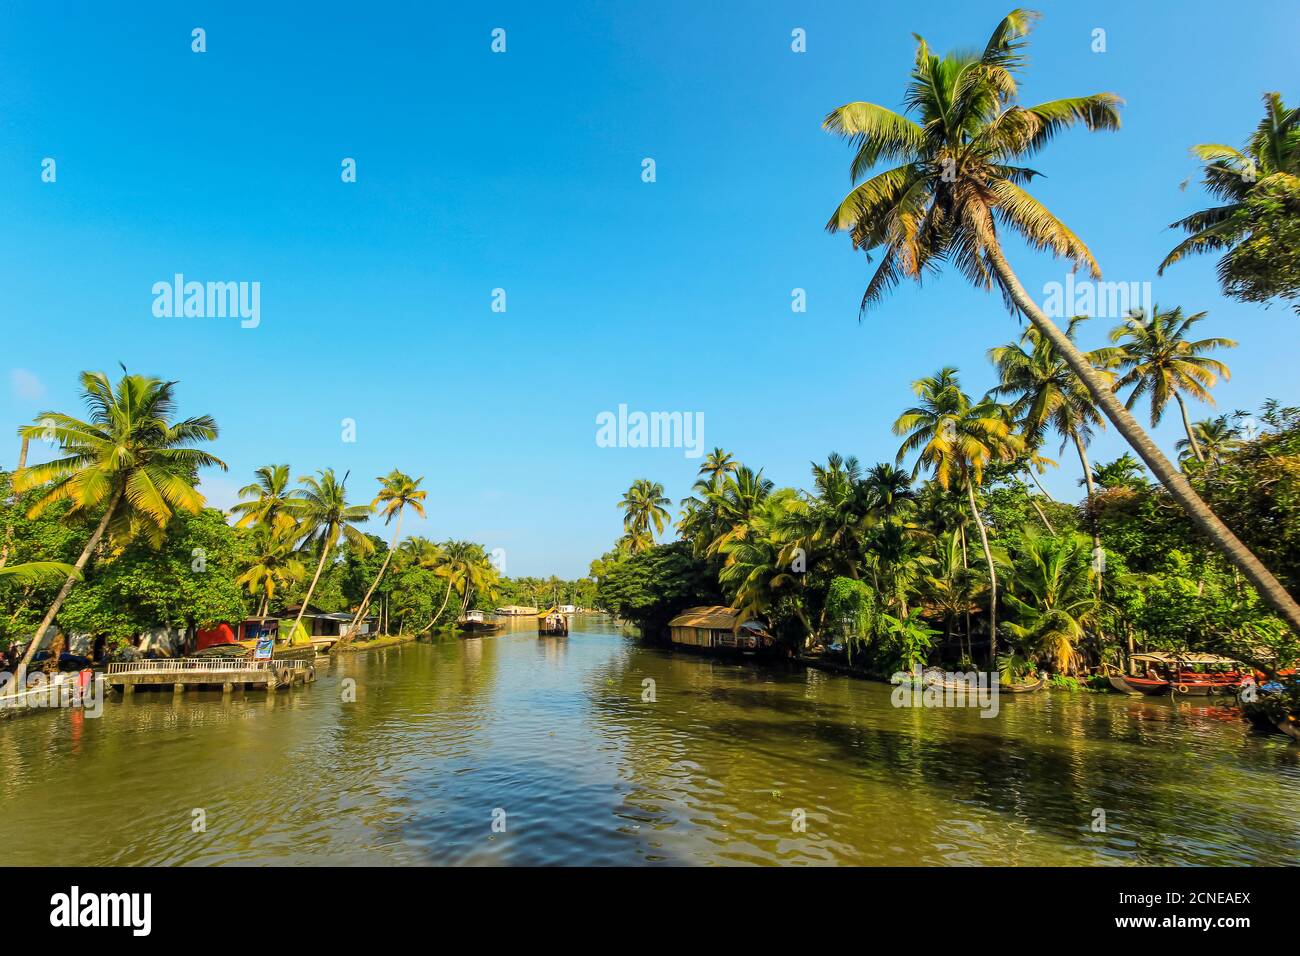 The palm fringed backwaters that attract the popular tourist houseboat cruises, Alappuzha (Alleppey), Kerala, India, Asia Stock Photo